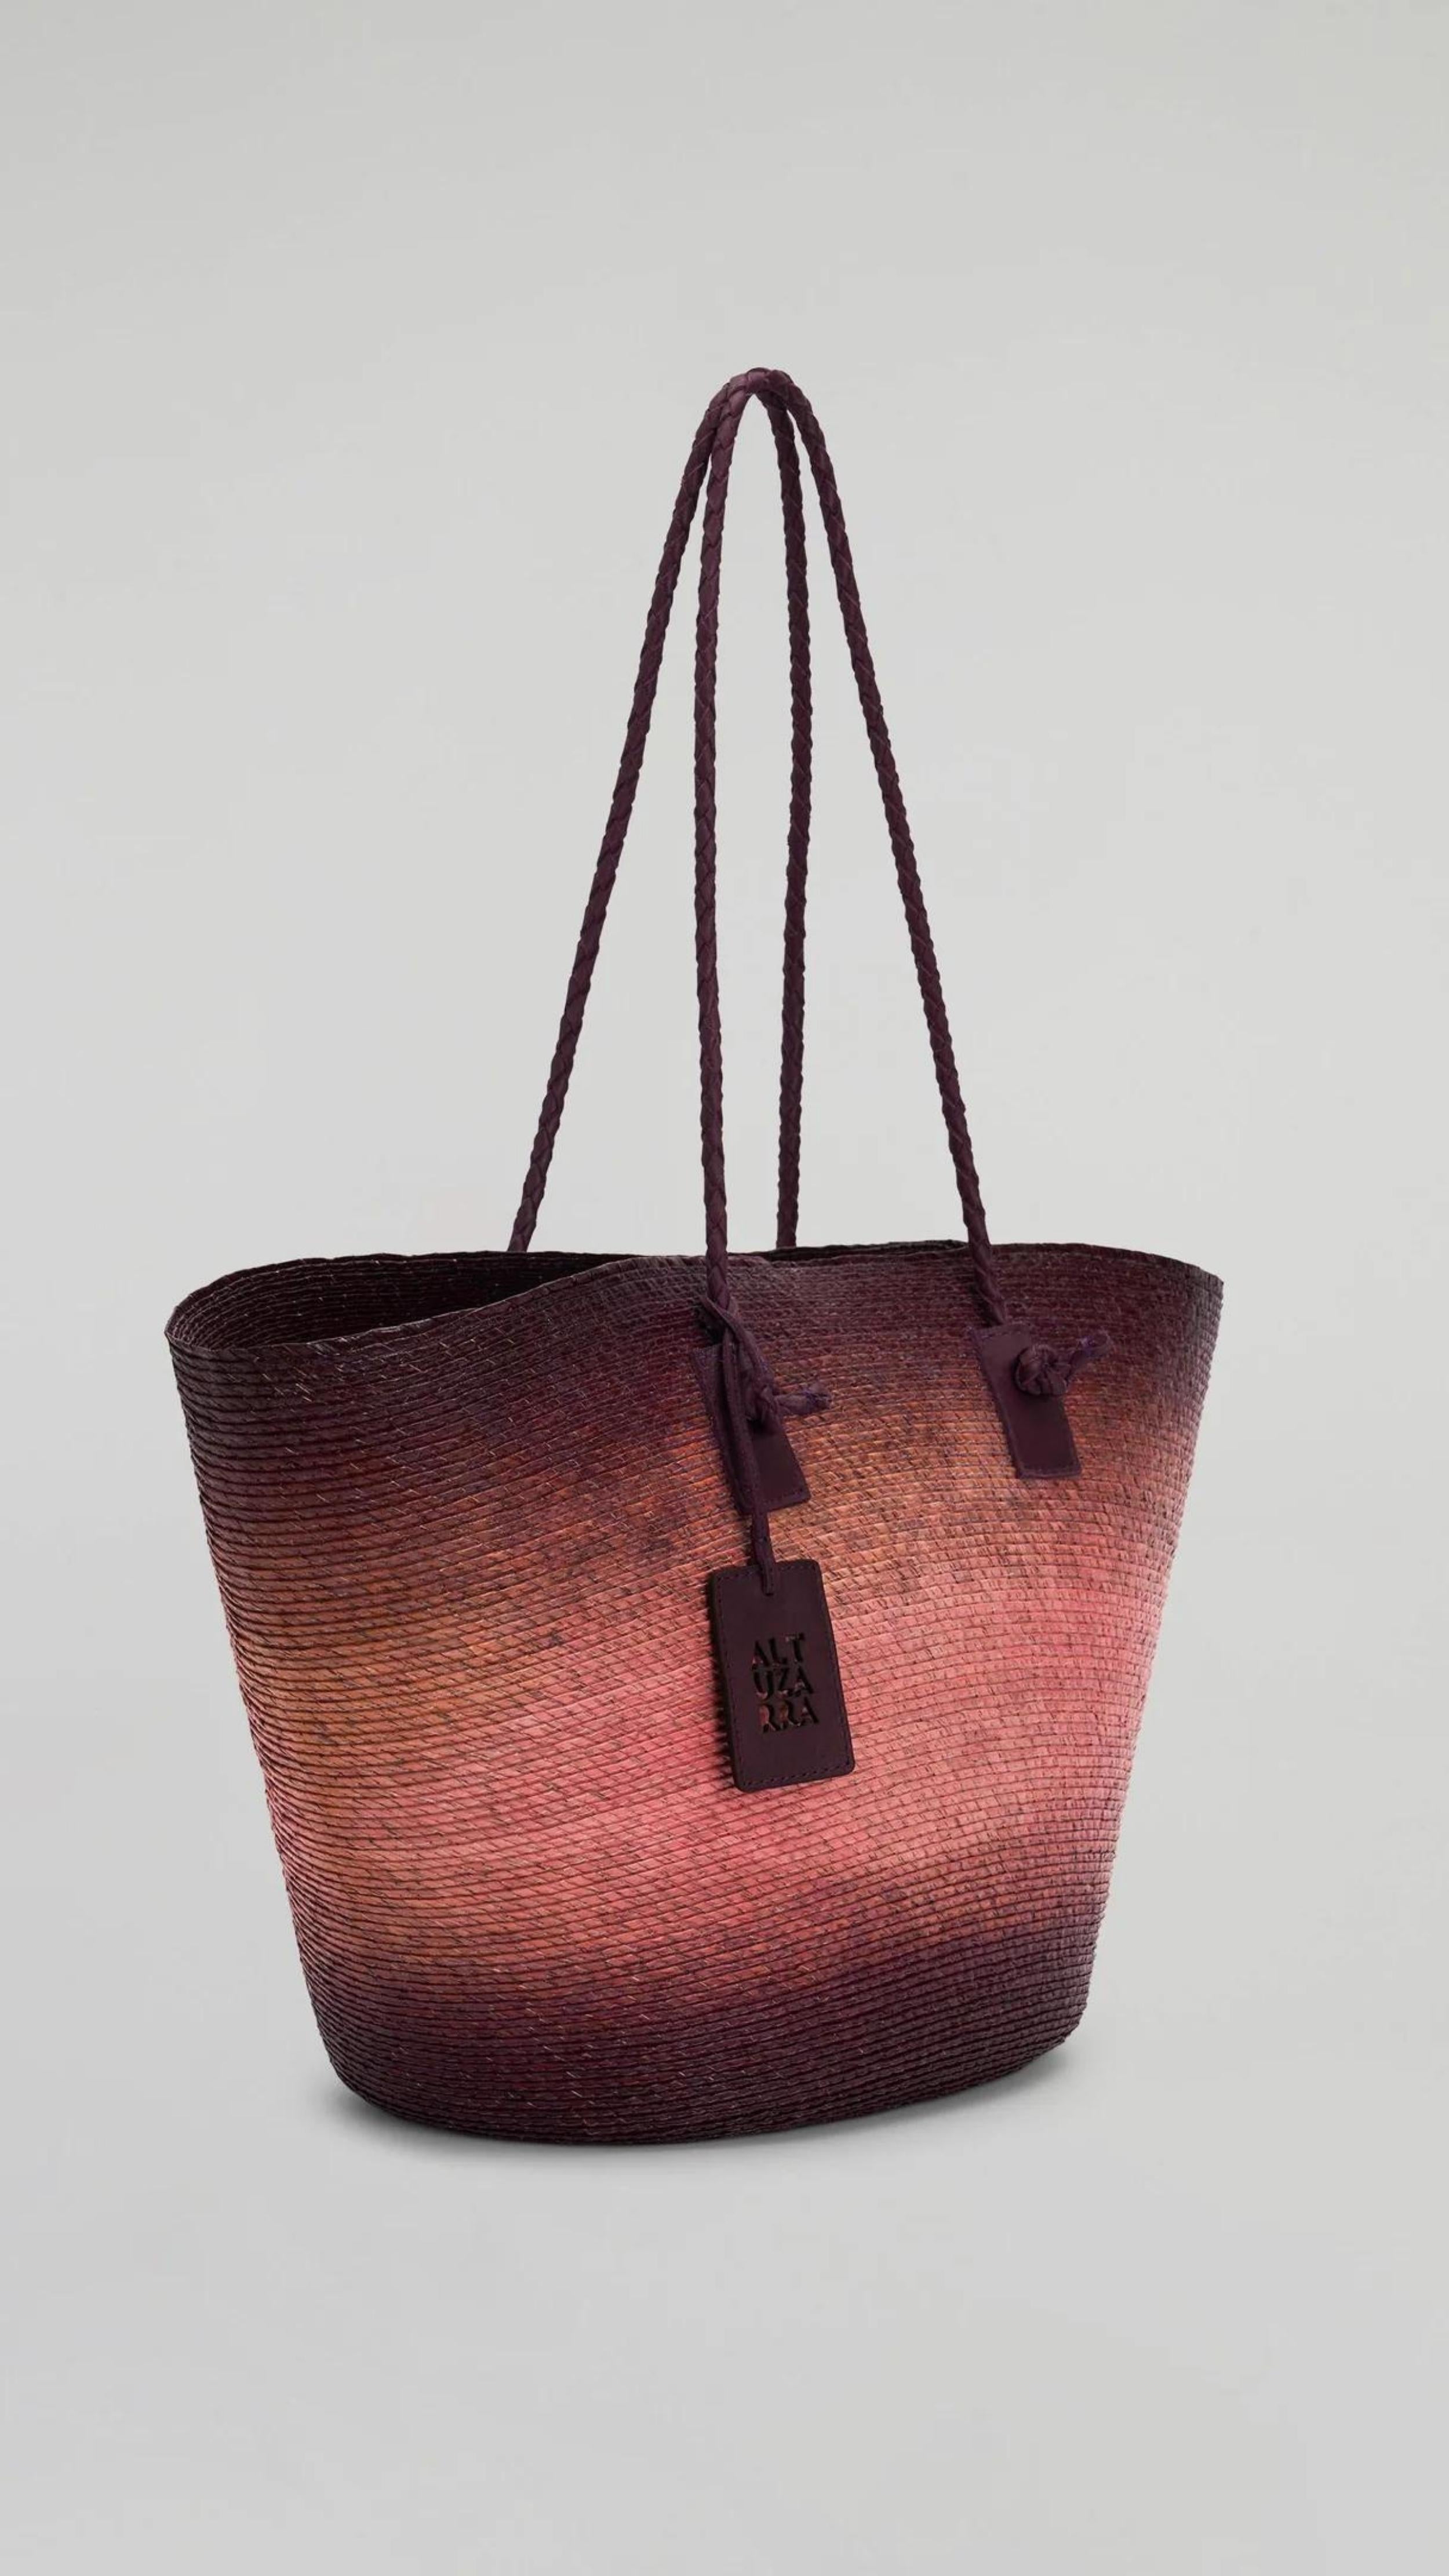 Altuzarra Large Watermill Bag in Orseille Landscape. Oversized raffia tote bag in pink and deep burgundy ombre colors. Woven raffia and palm with burgundy braided leather details. Available at experience 27 in madrid spain.